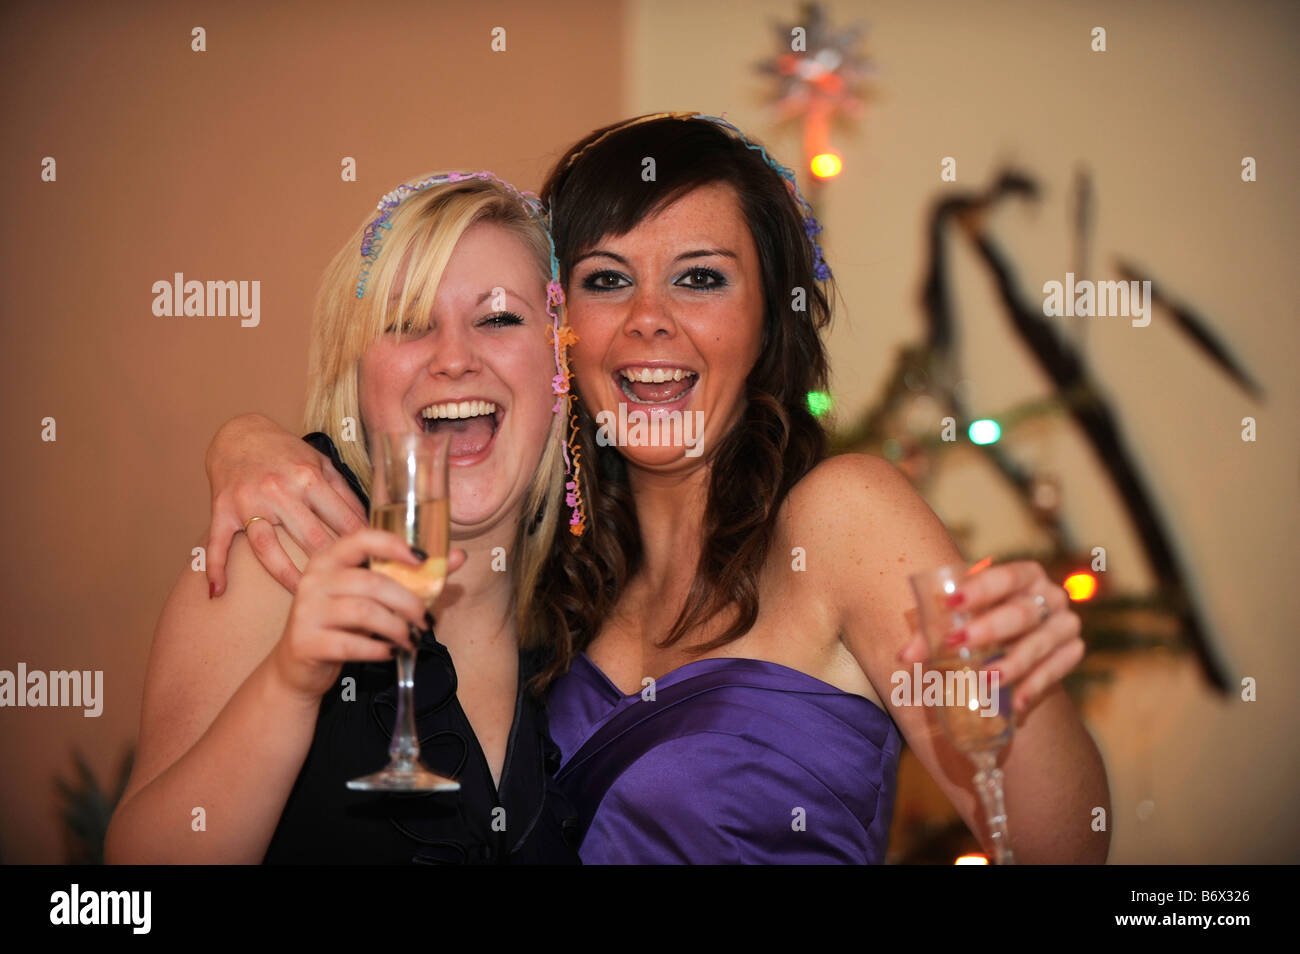 Party girls drinking sparkling wine getting drunk on a night out Stock Photo